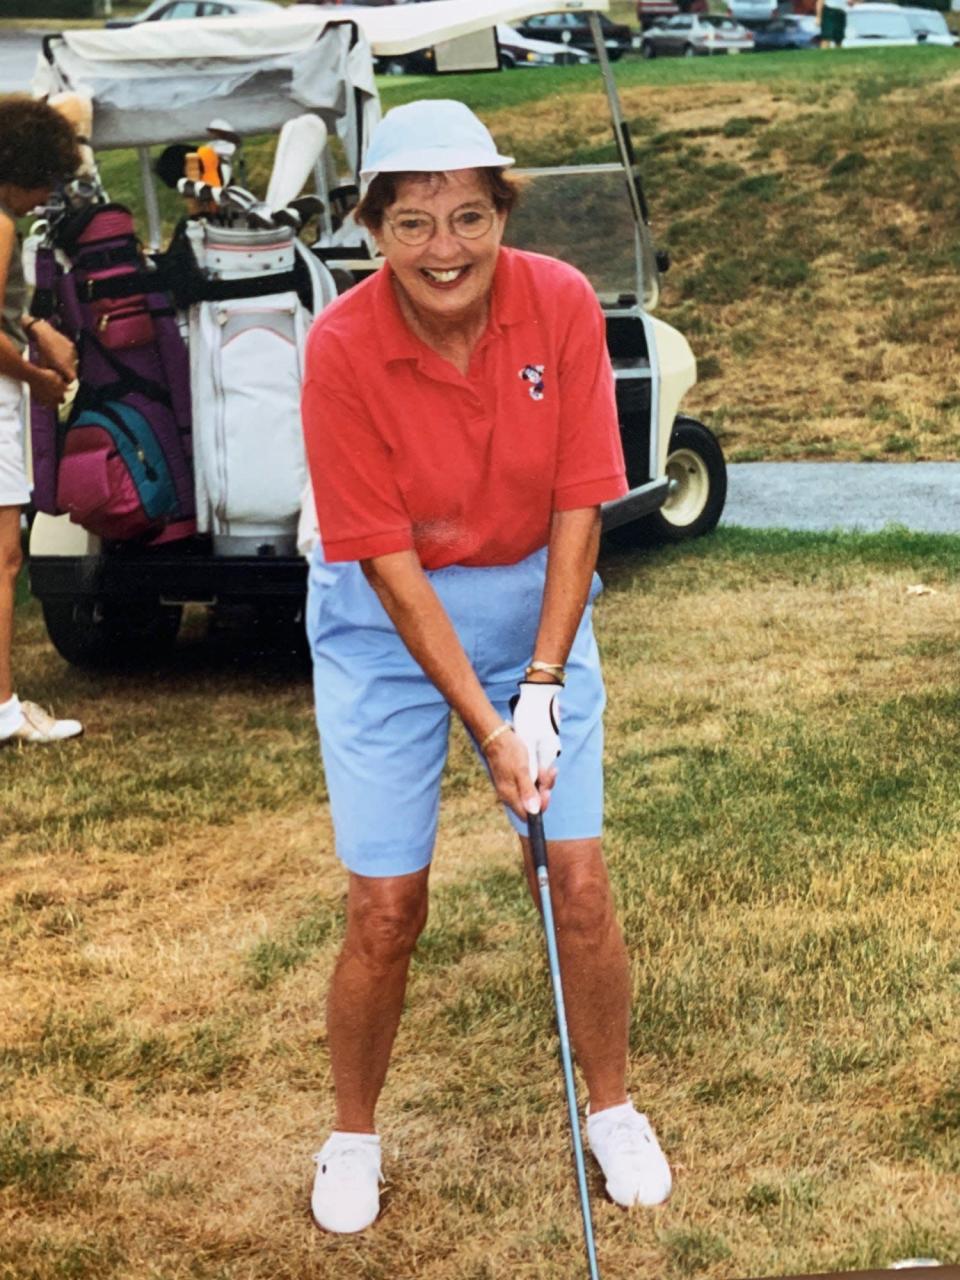 After meeting her second husband, Andrew J. Walsh II, an avid golfer, Charlotte took up the sport.